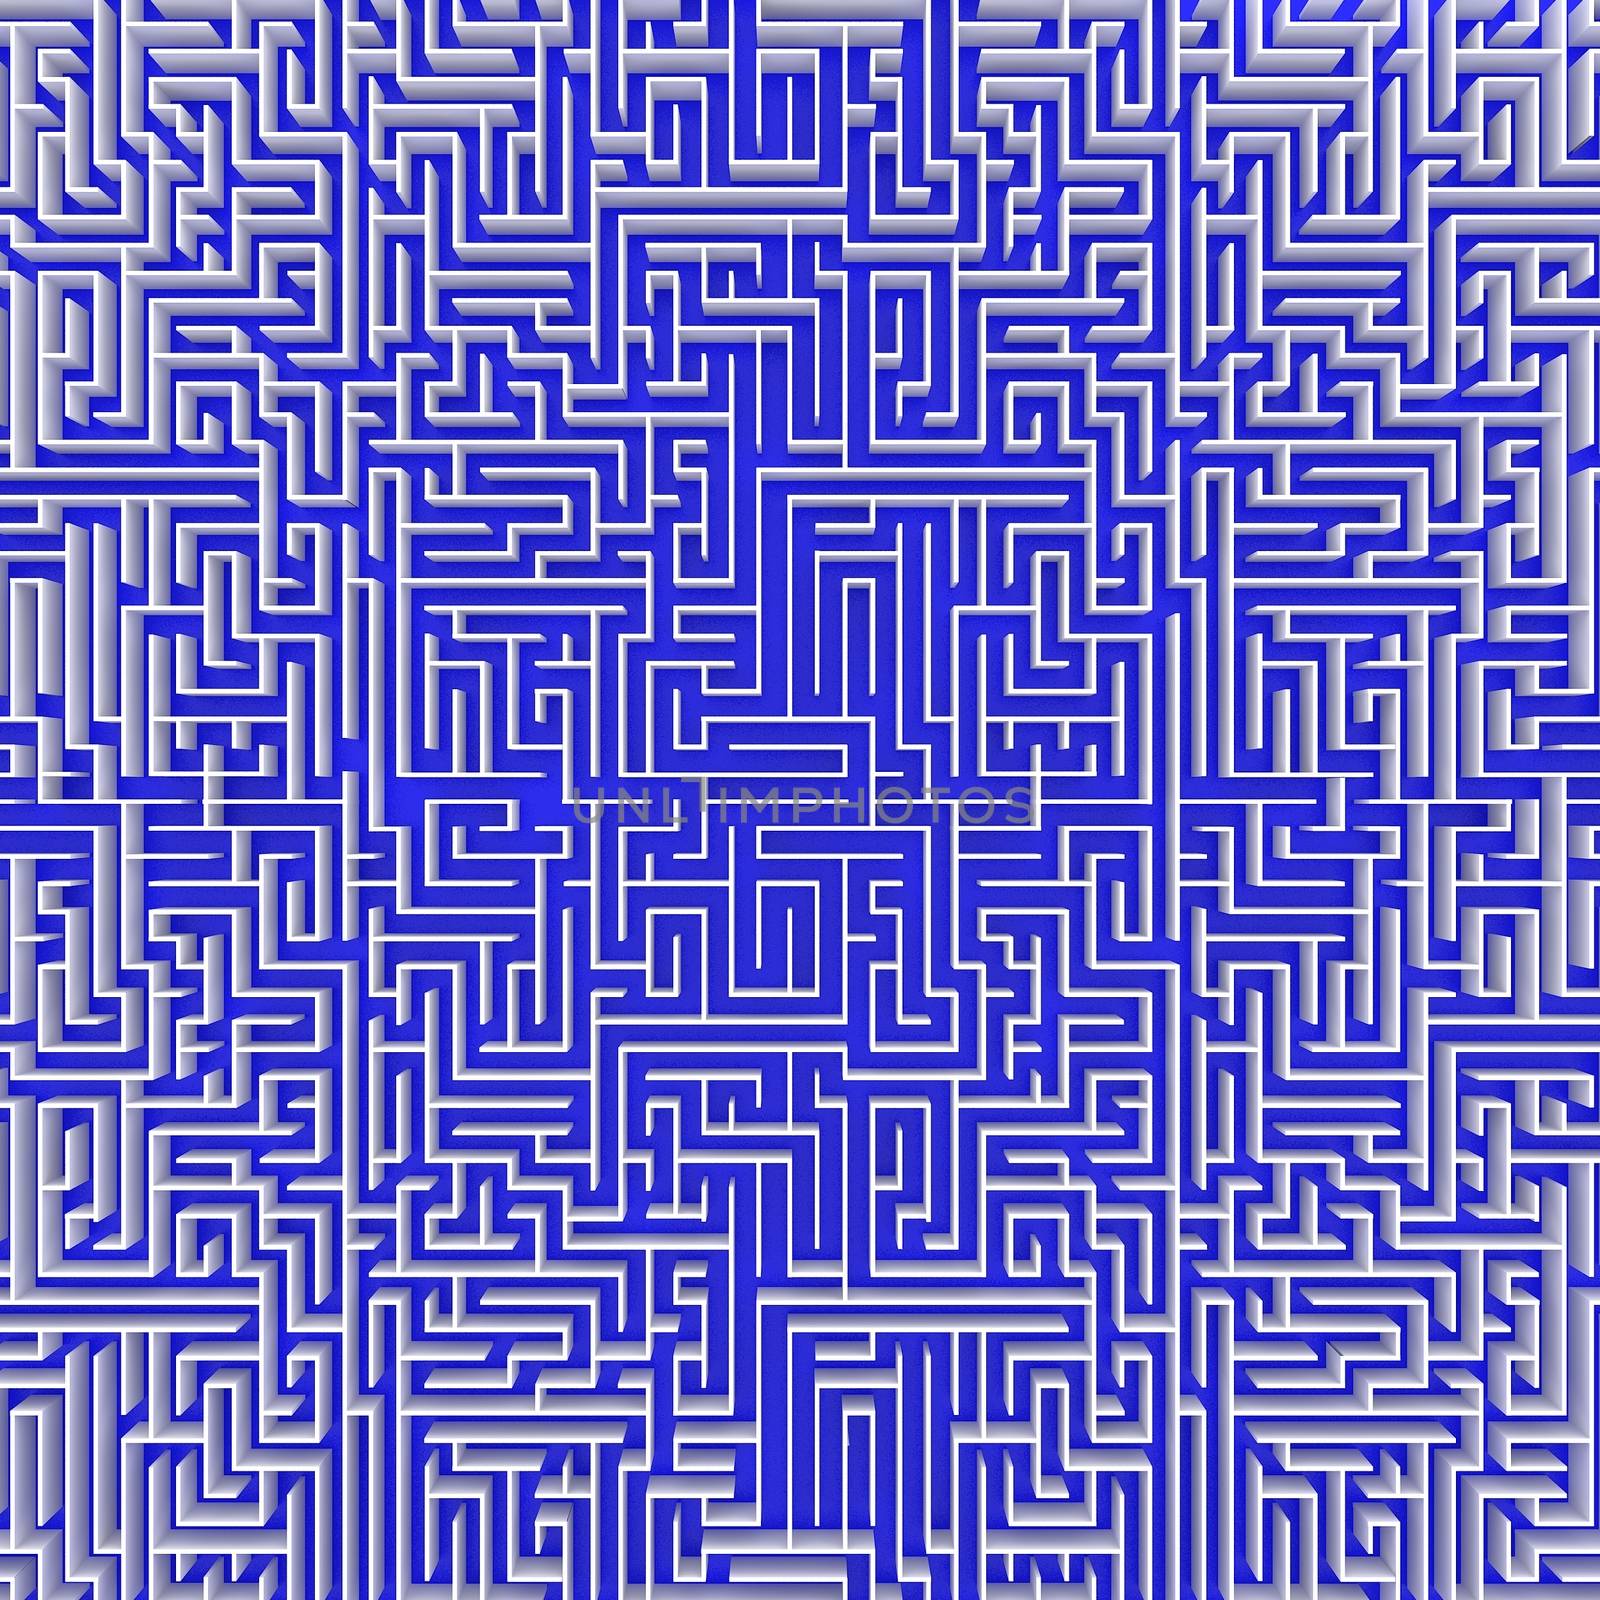 top view of endless maze 3d illustration